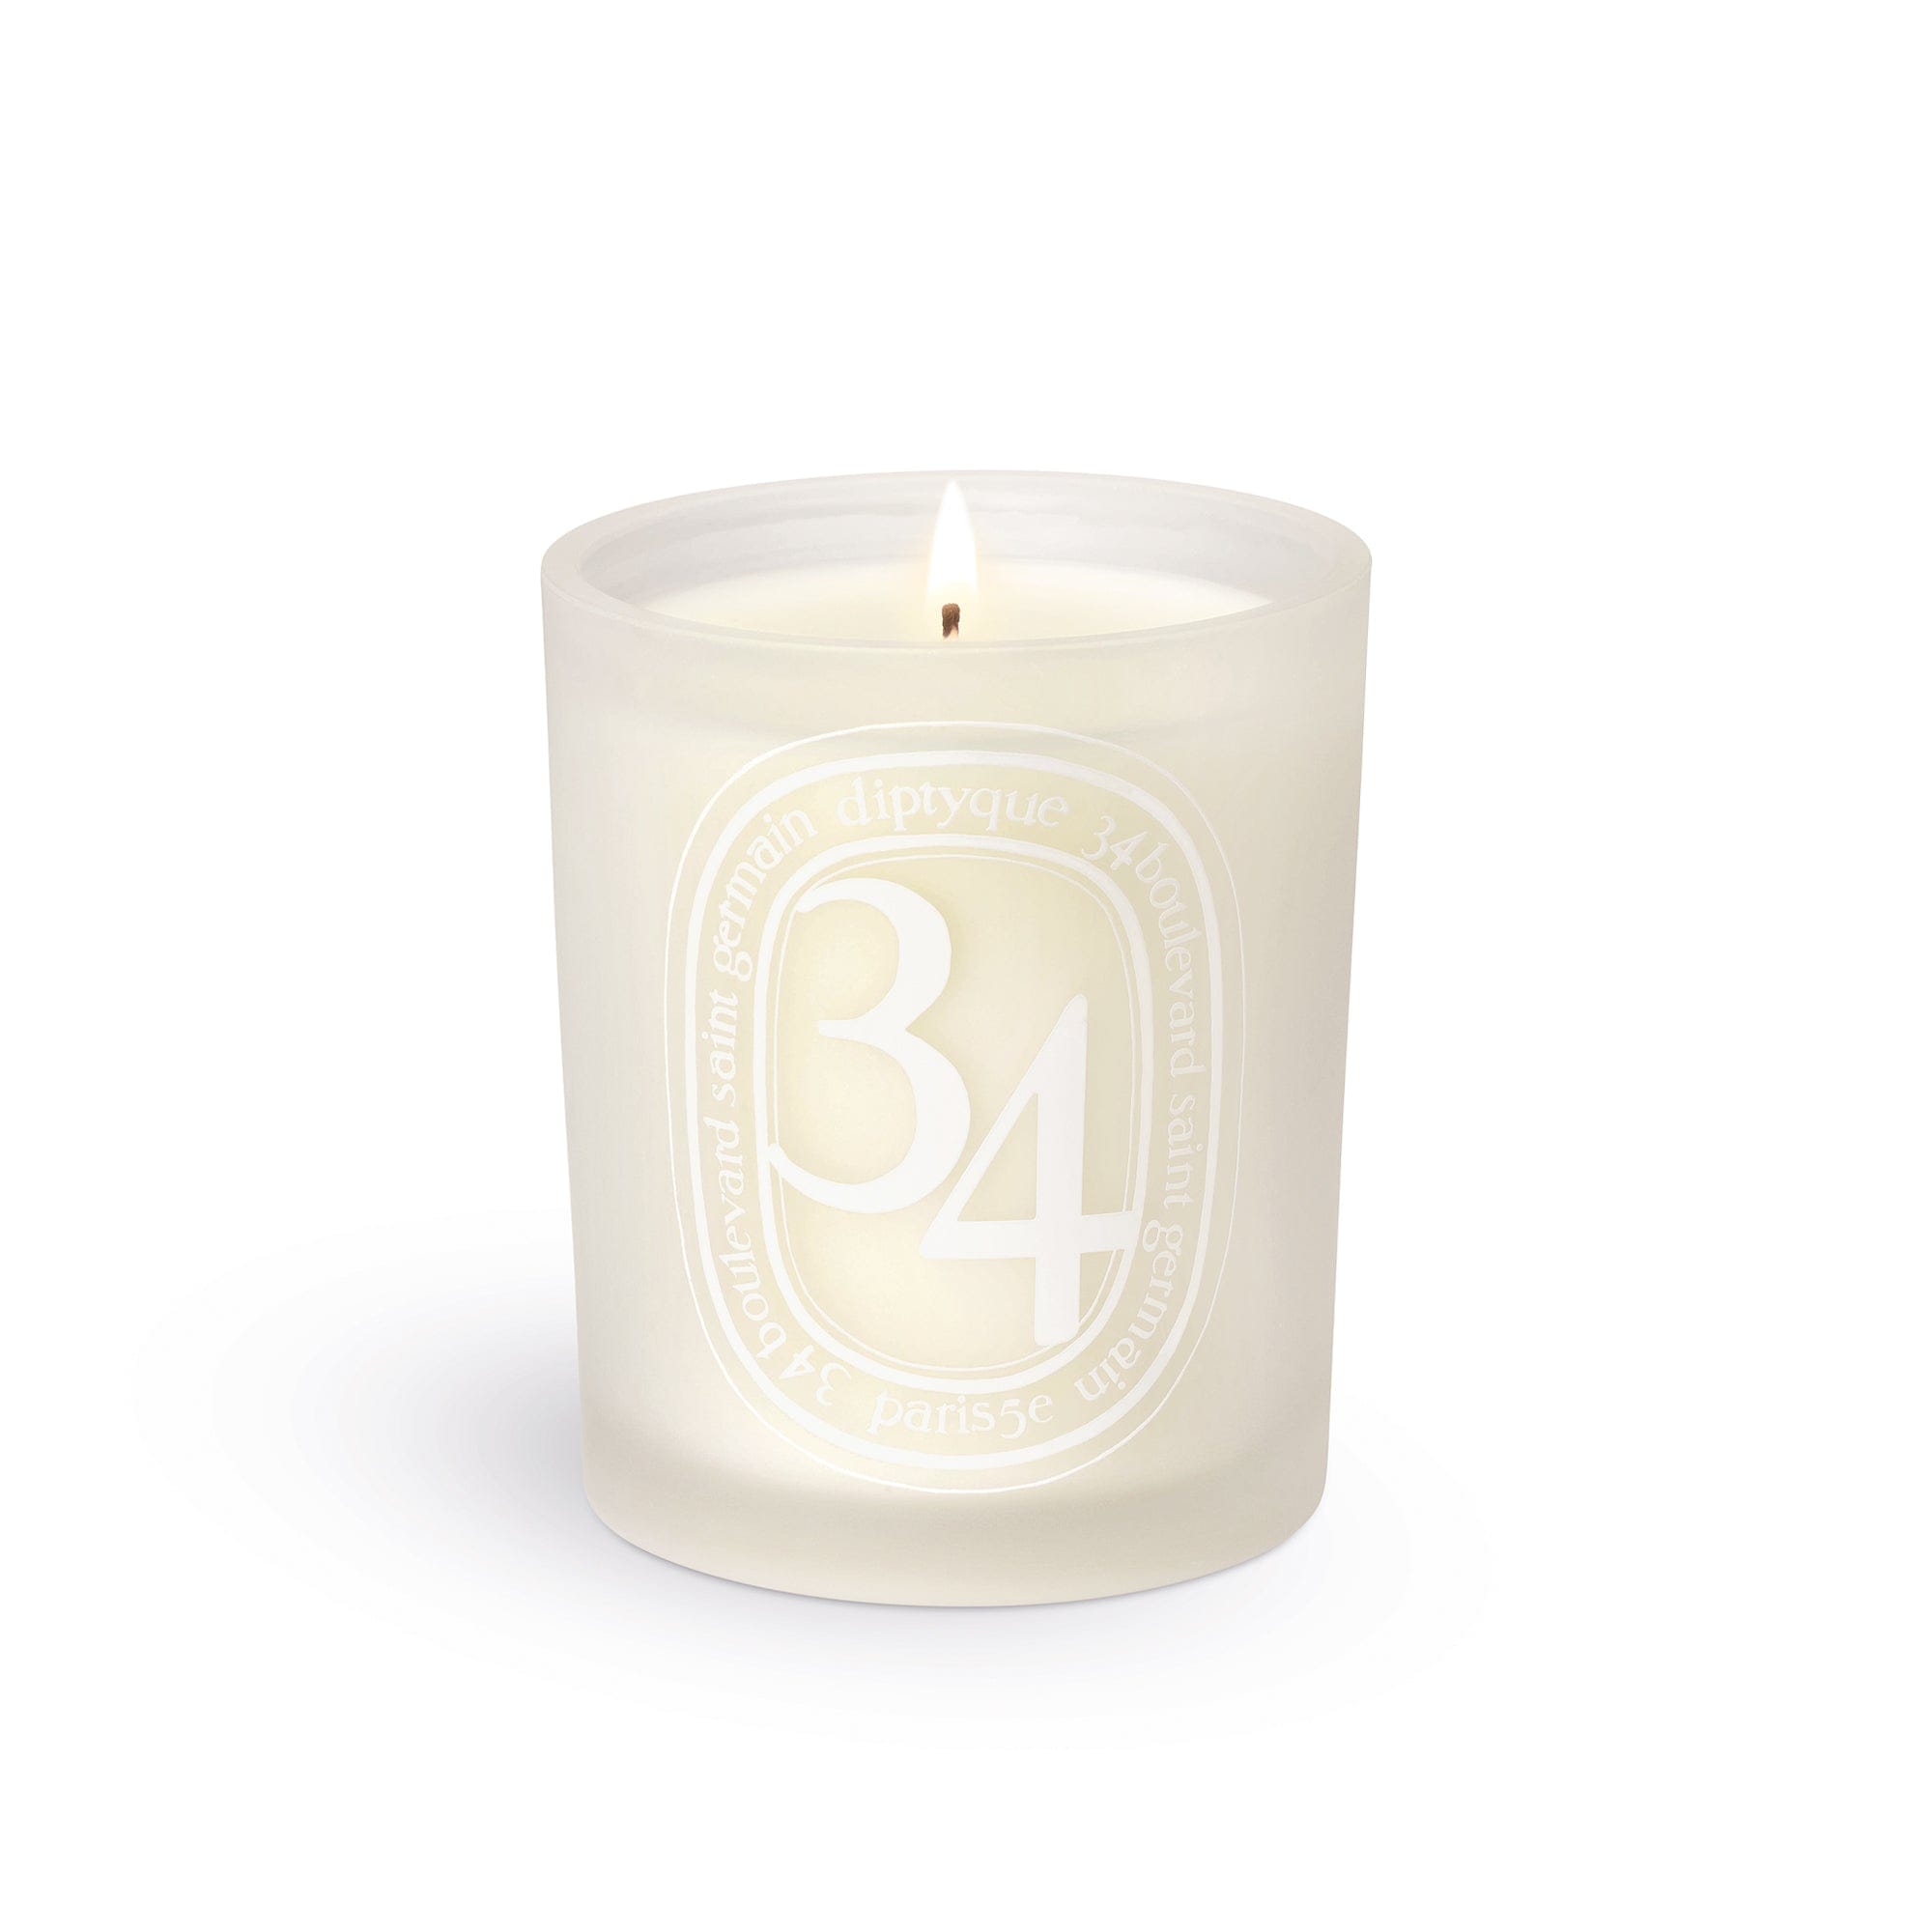 34 boulevard saint germain Diptyque Scented candle